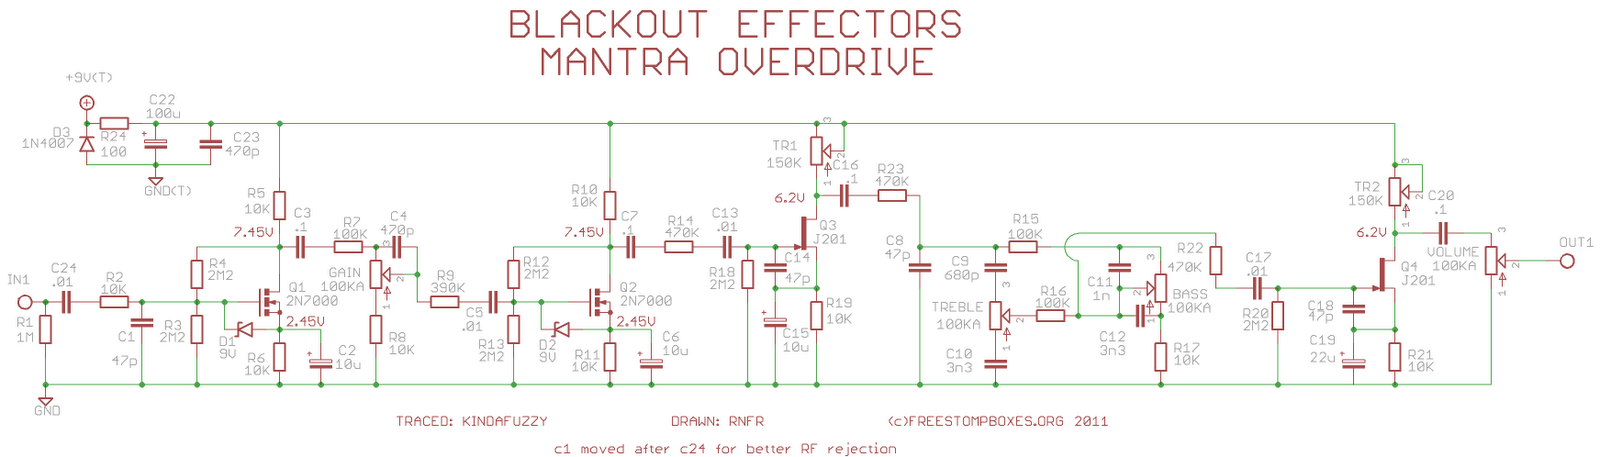 Perf and PCB Effects Layouts: Blackout Effectors Mantra Overdrive